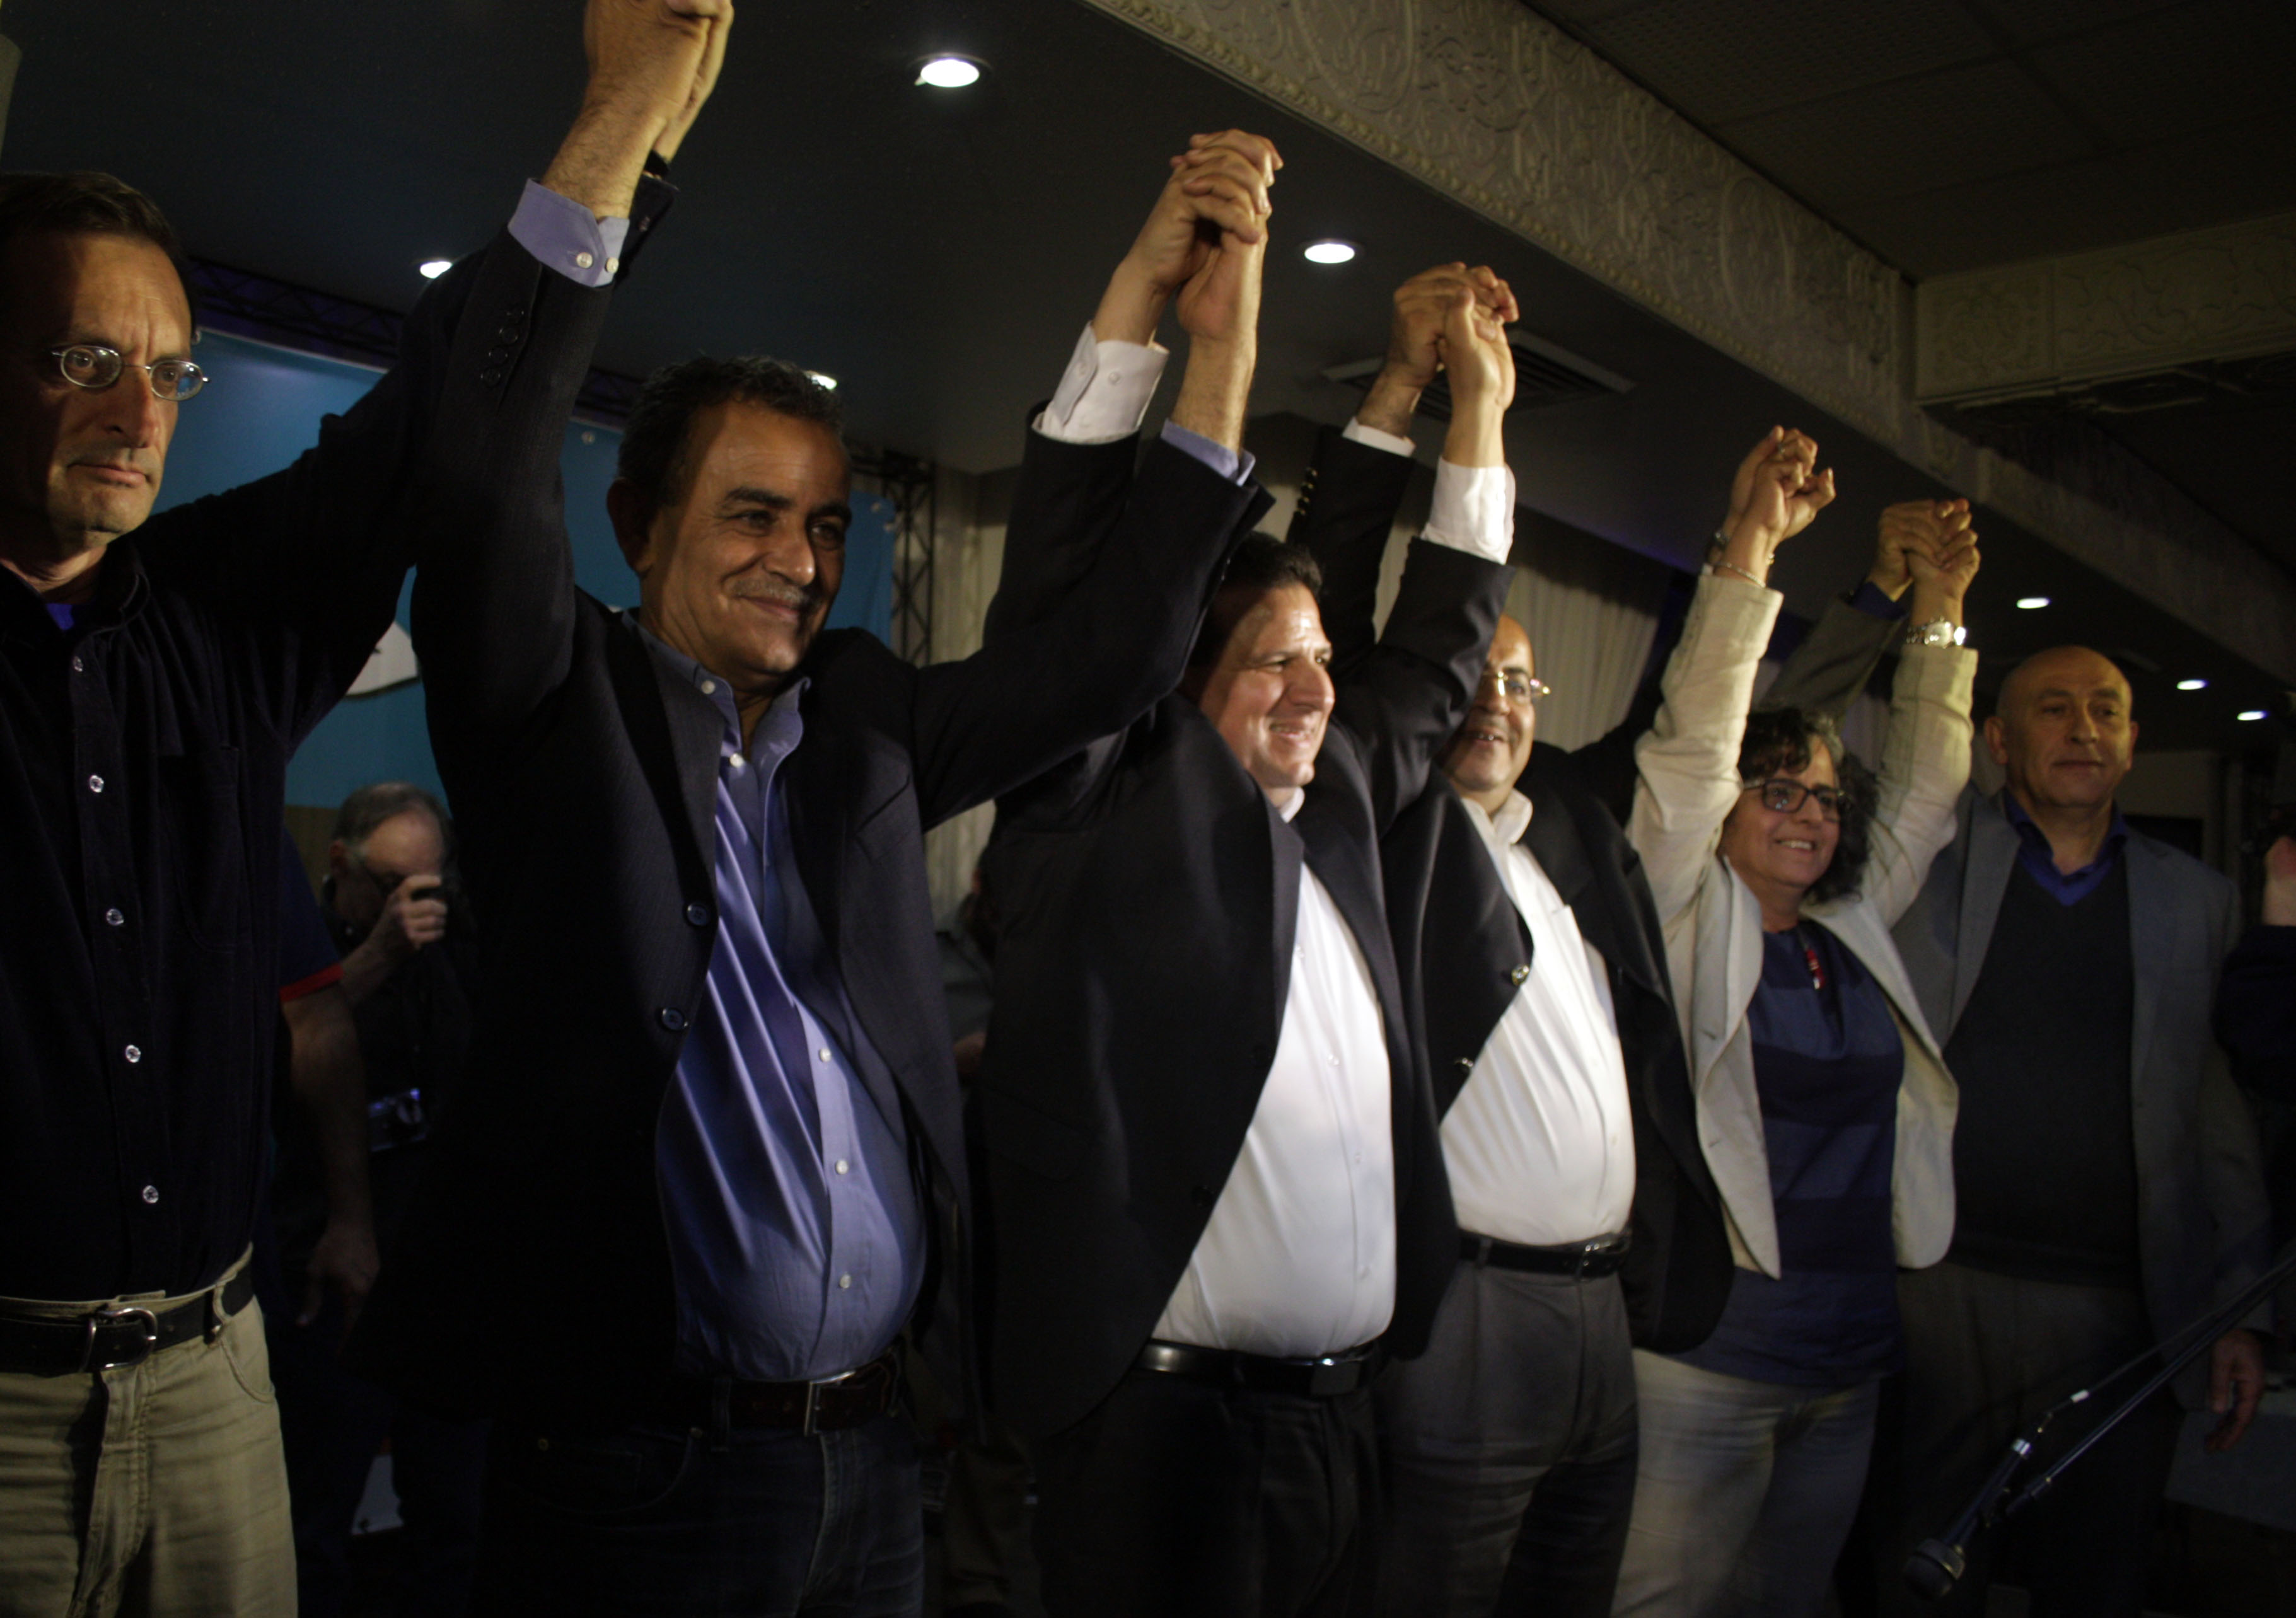 Ayman Odeh (3rd from left) and members of the Joint Arab List, Nazareth, 17 March 2015 (photo: Ylenia Gostoli)